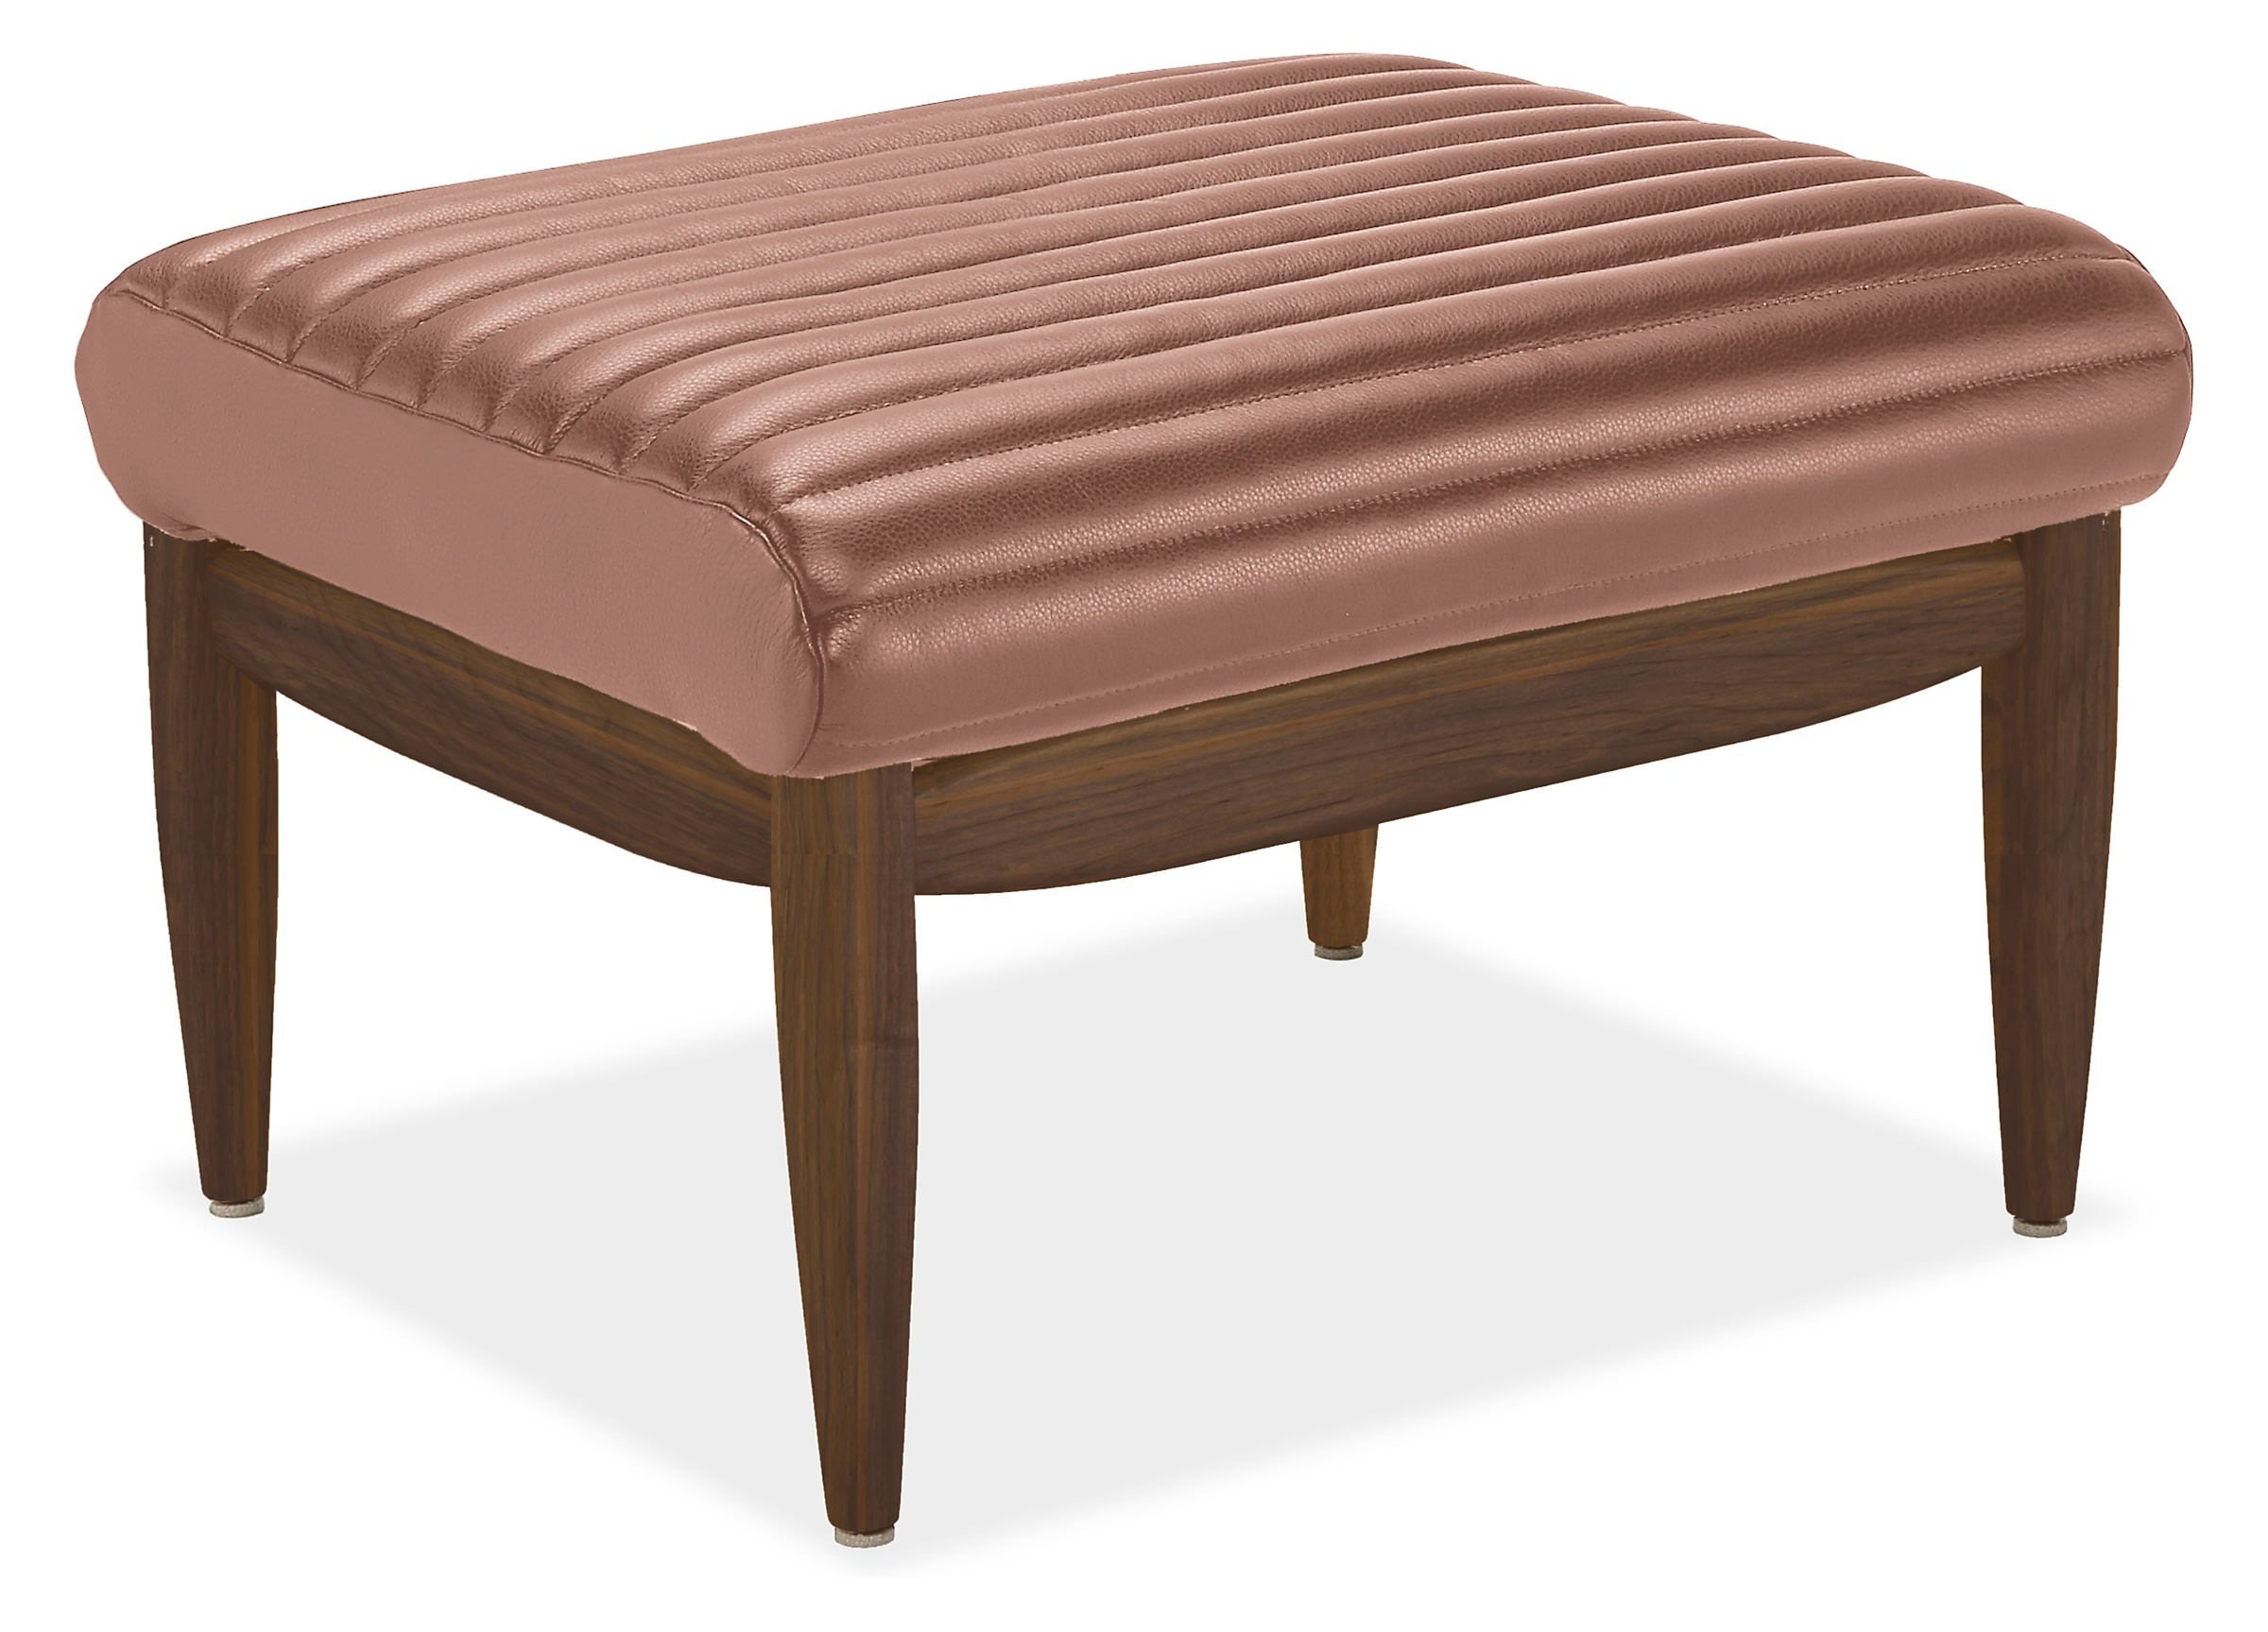 Callan 24w 20d 15h Ottoman in Vento Rosewood Leather with Walnut Frame